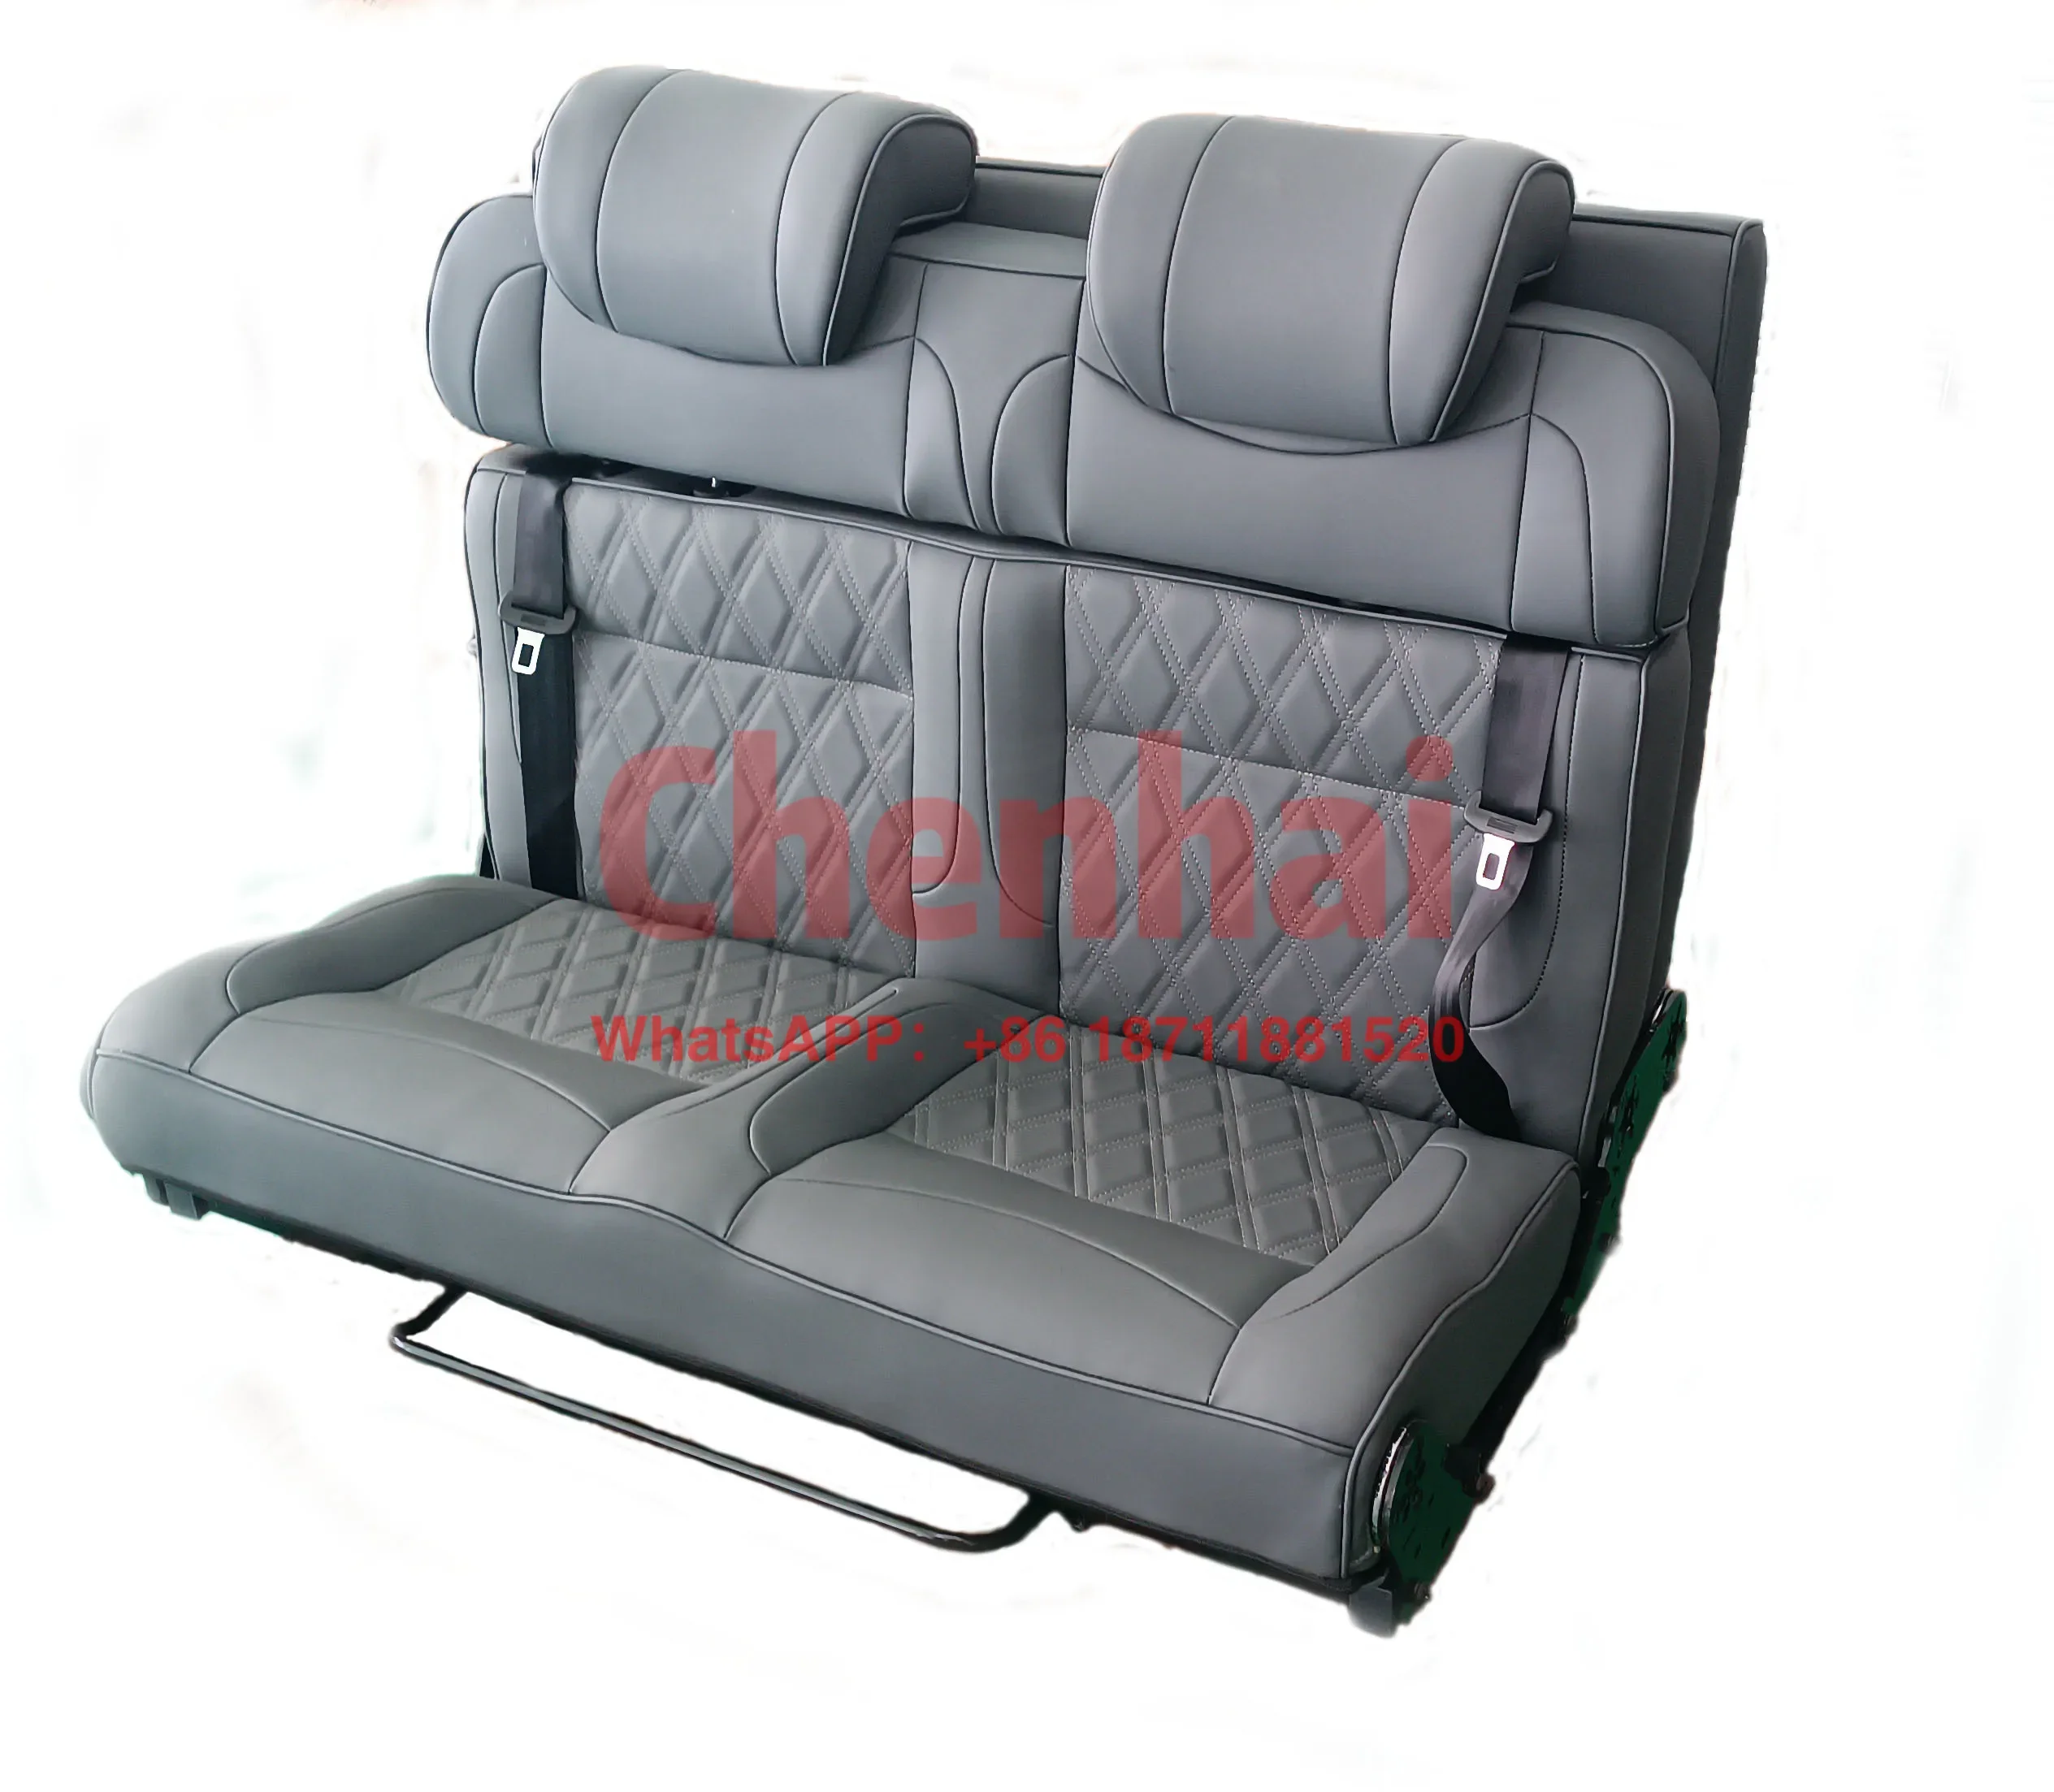 CustomizedYSR Seating Customized motorhome 2 travelling seats 3 Folding Bed 2-person RV BED SEATS 1120MM for sale